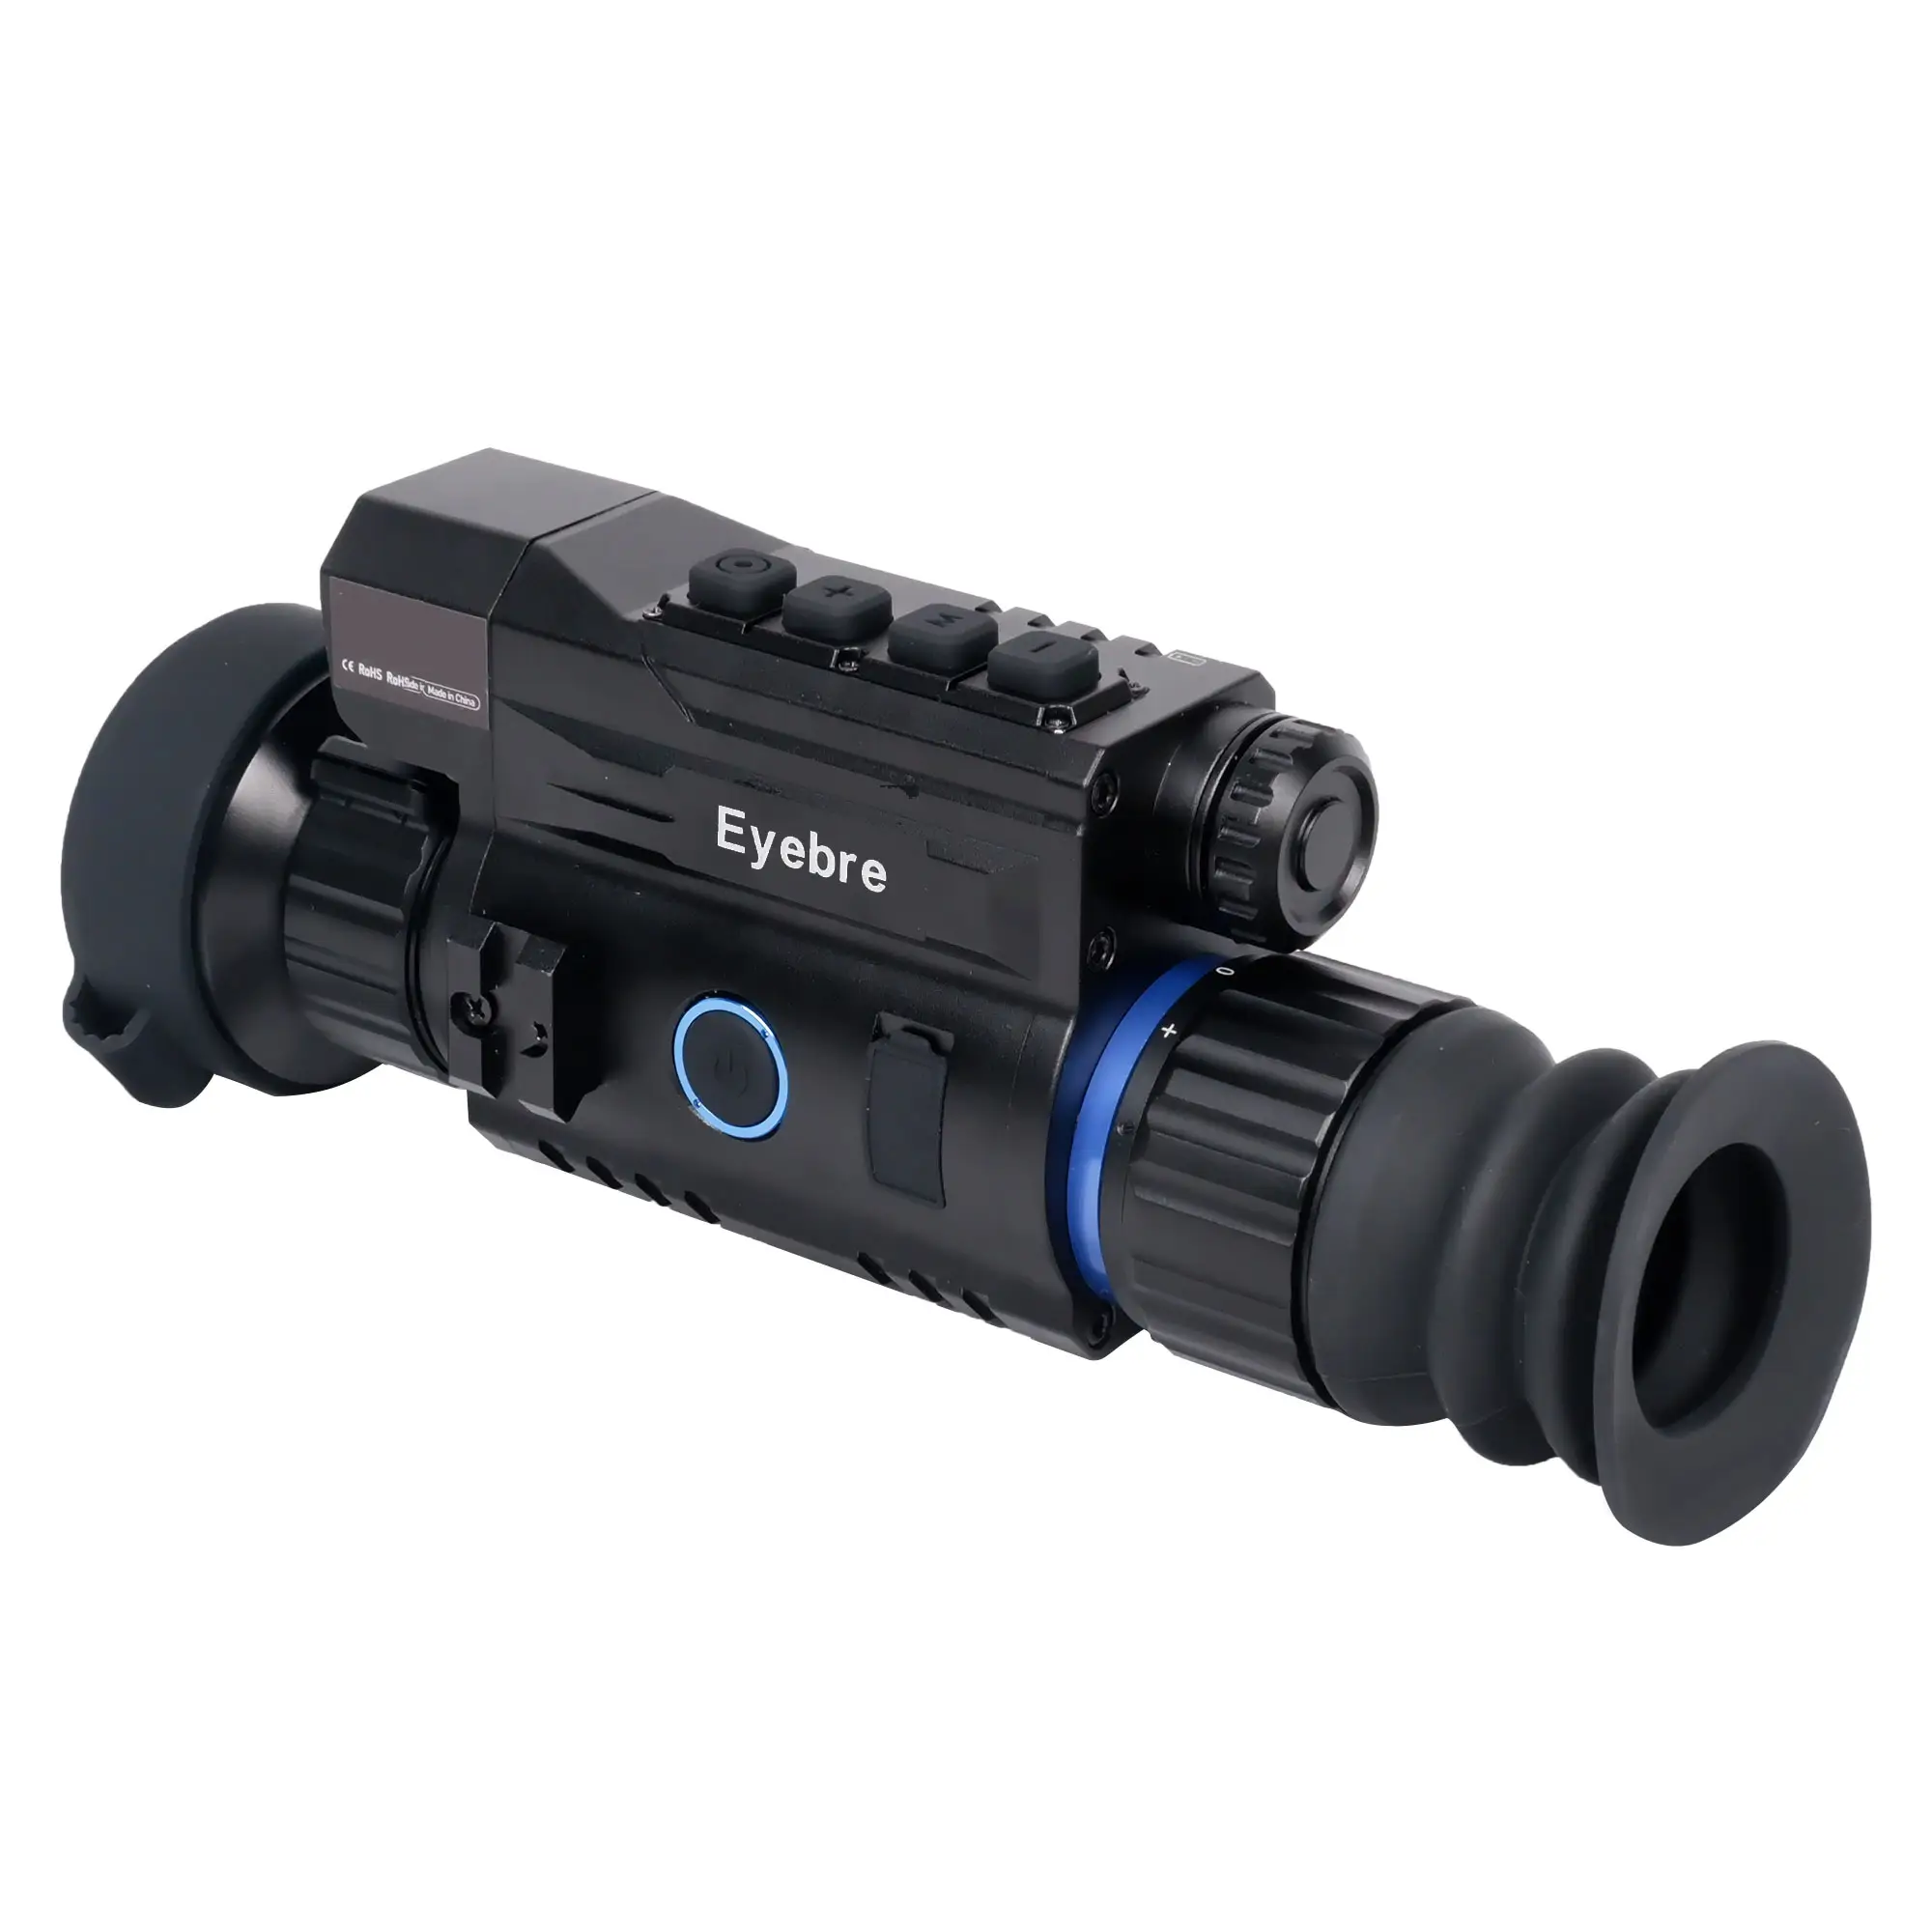 Eyebre TR22-50mm Tank Infrared Imager Night Vision Monocular Hunting Scope Thermal Imaging Scope